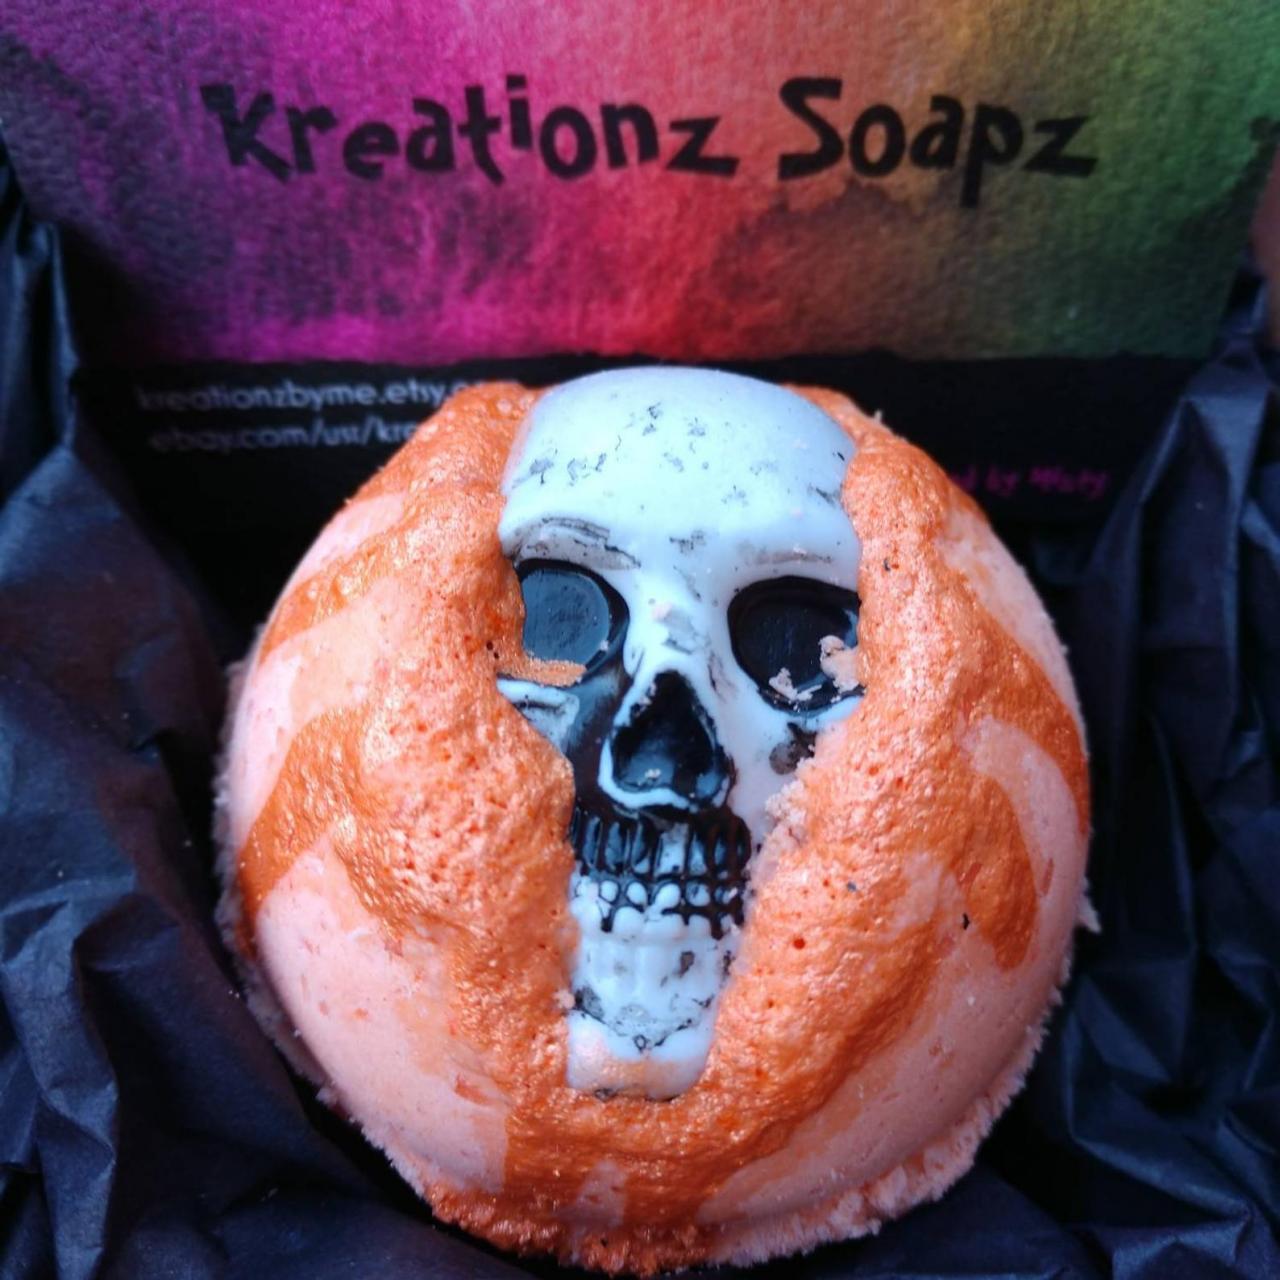 Orange marjoram bath bombs with or without skull toy